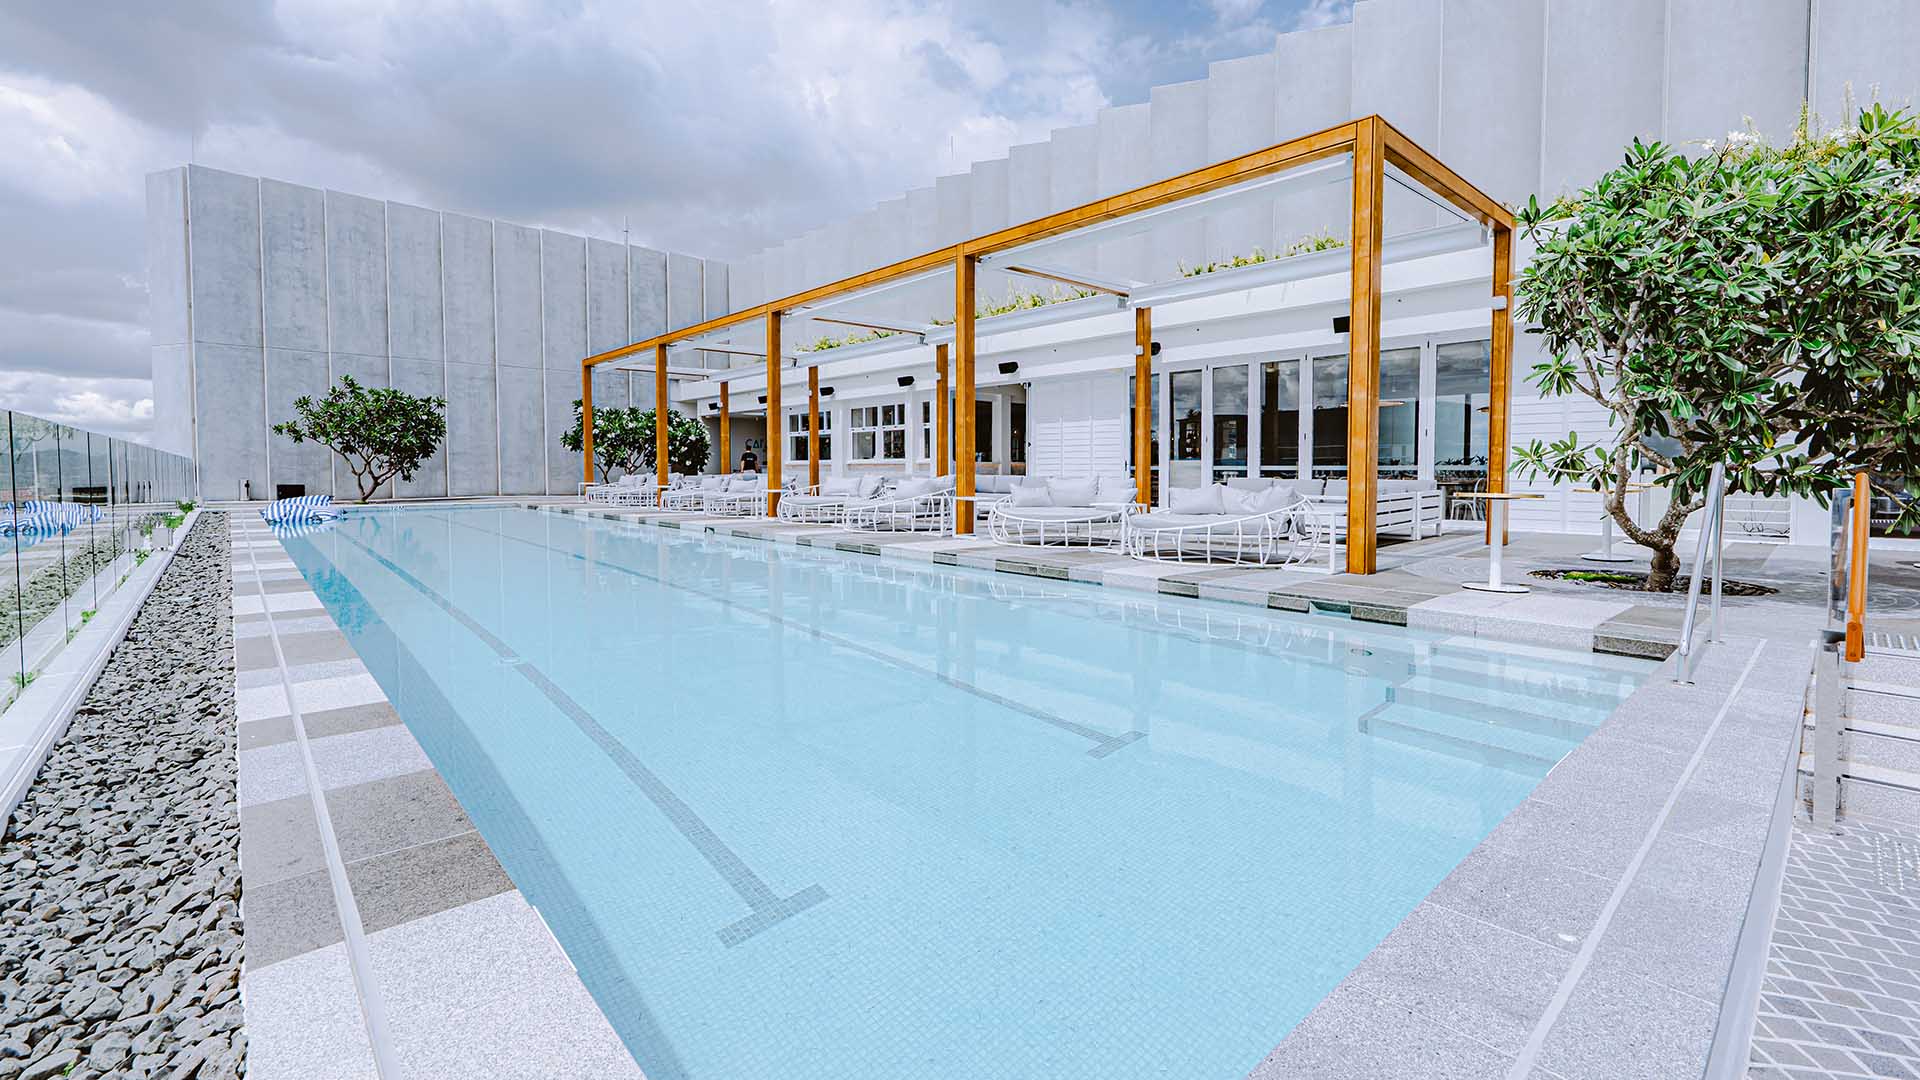 Catalina Is South Brisbane's New Beach Club-Inspired Rooftop Bar with a 30-Metre Infinity Pool